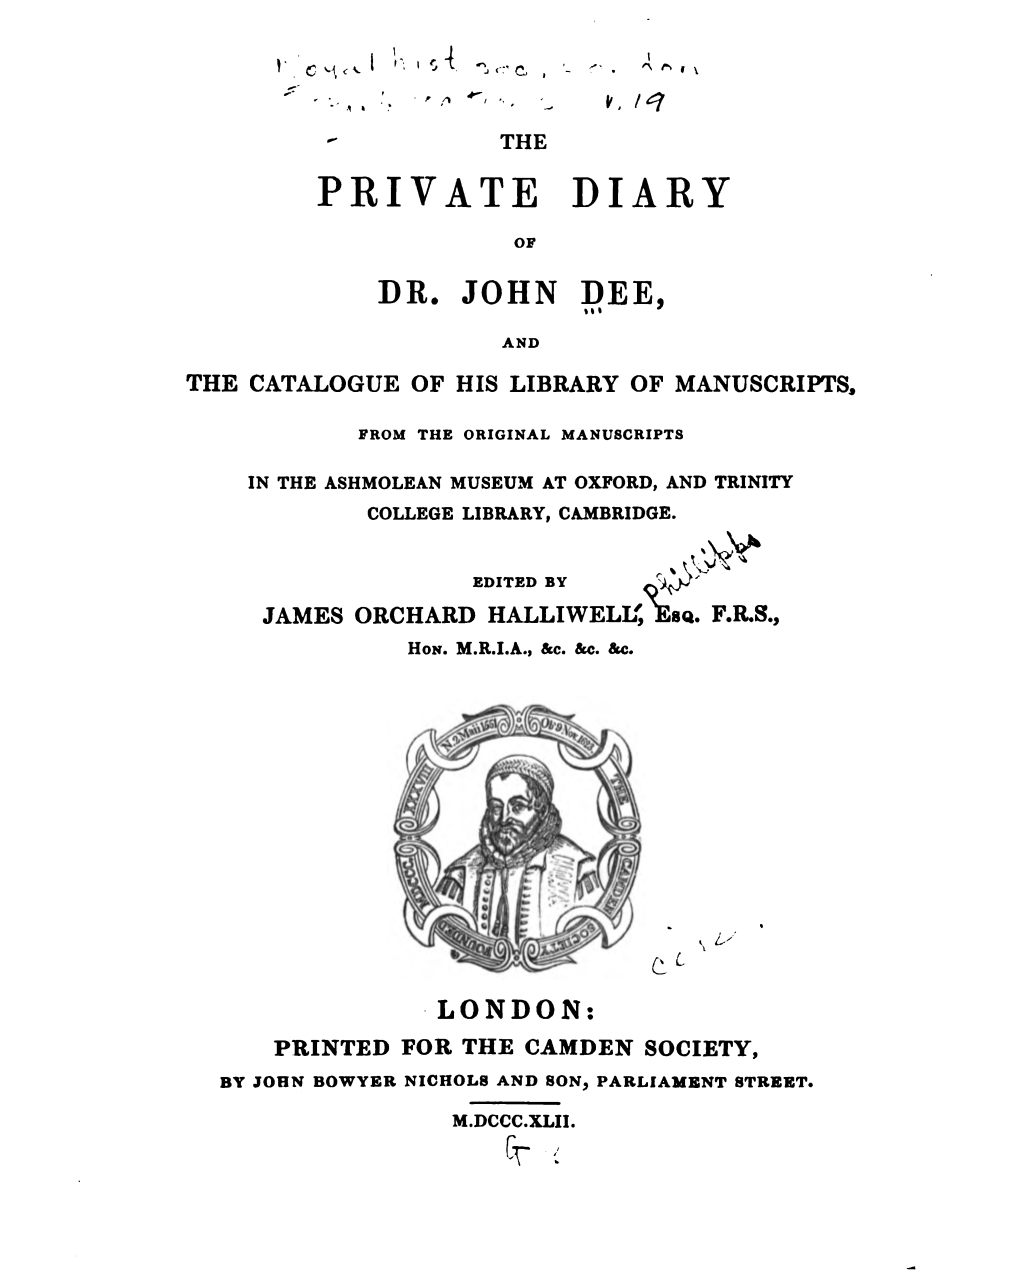 The Private Diary of Dr. John Dee, from the MS